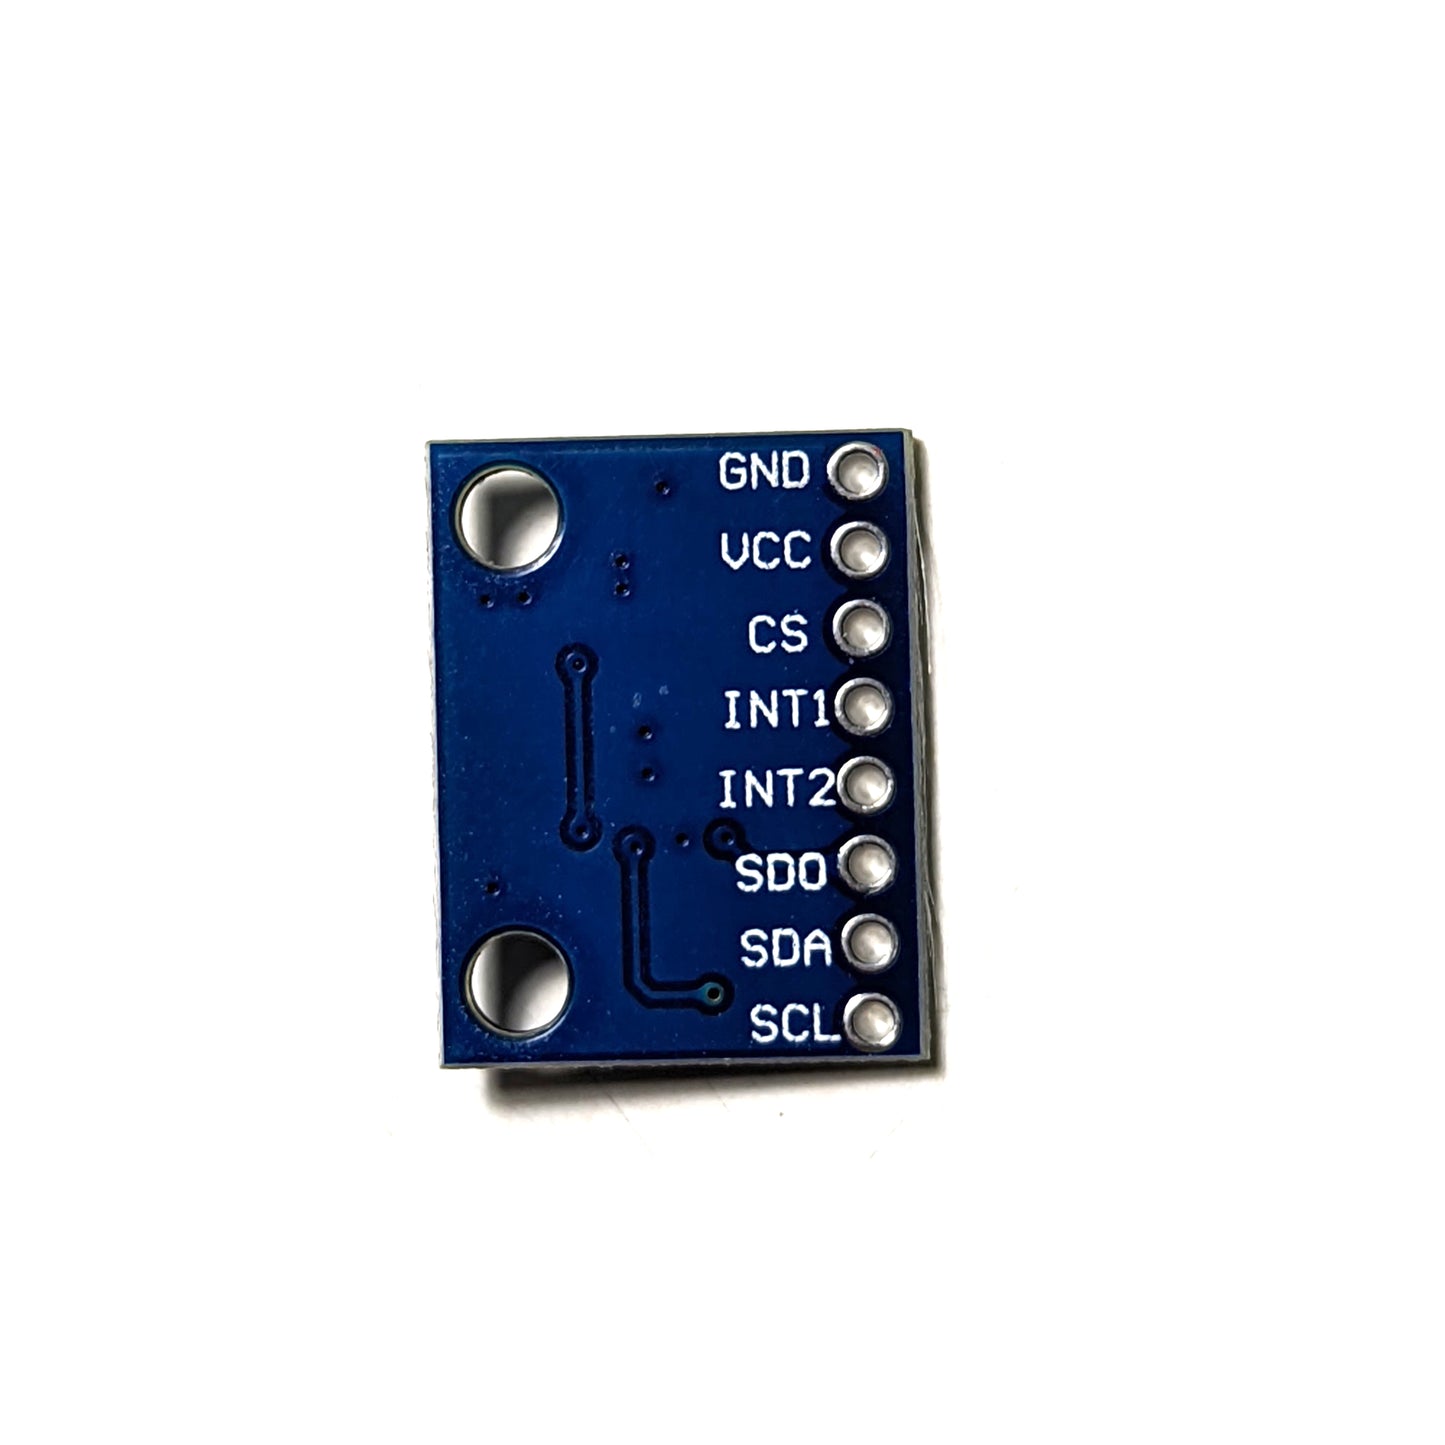 ADXL345 3-Axis Accelerometer (2 pack)